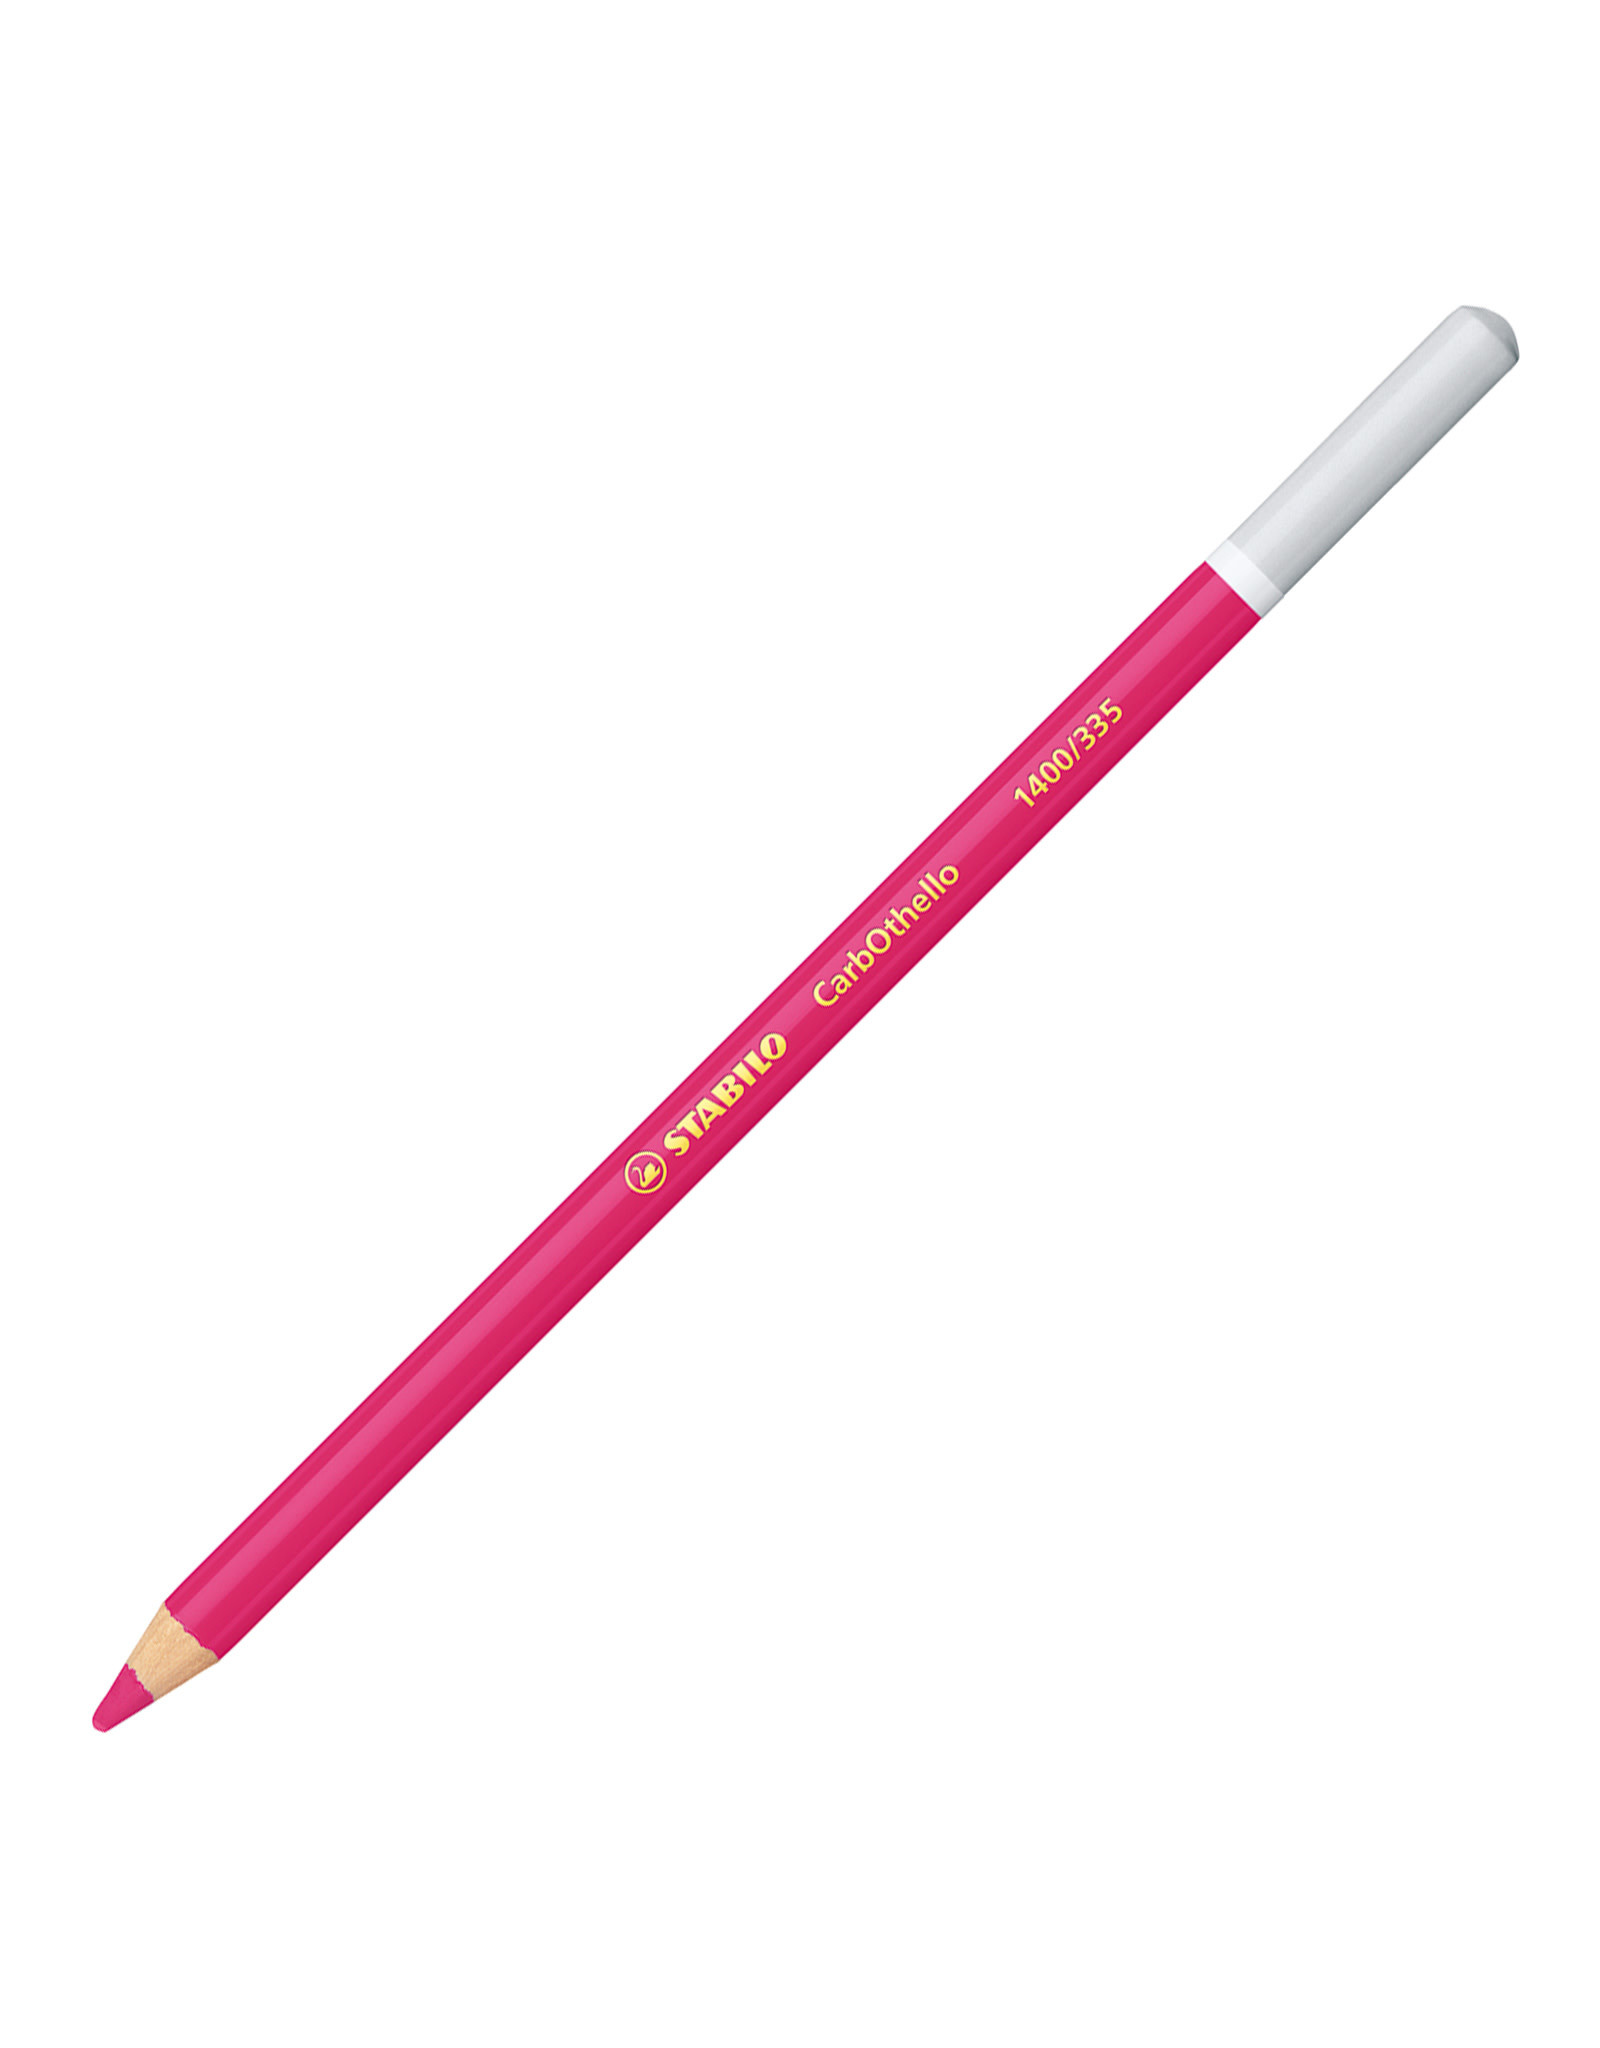 Stabilo Carbothello Pencil Magenta - The Art Store/Commercial Art Supply